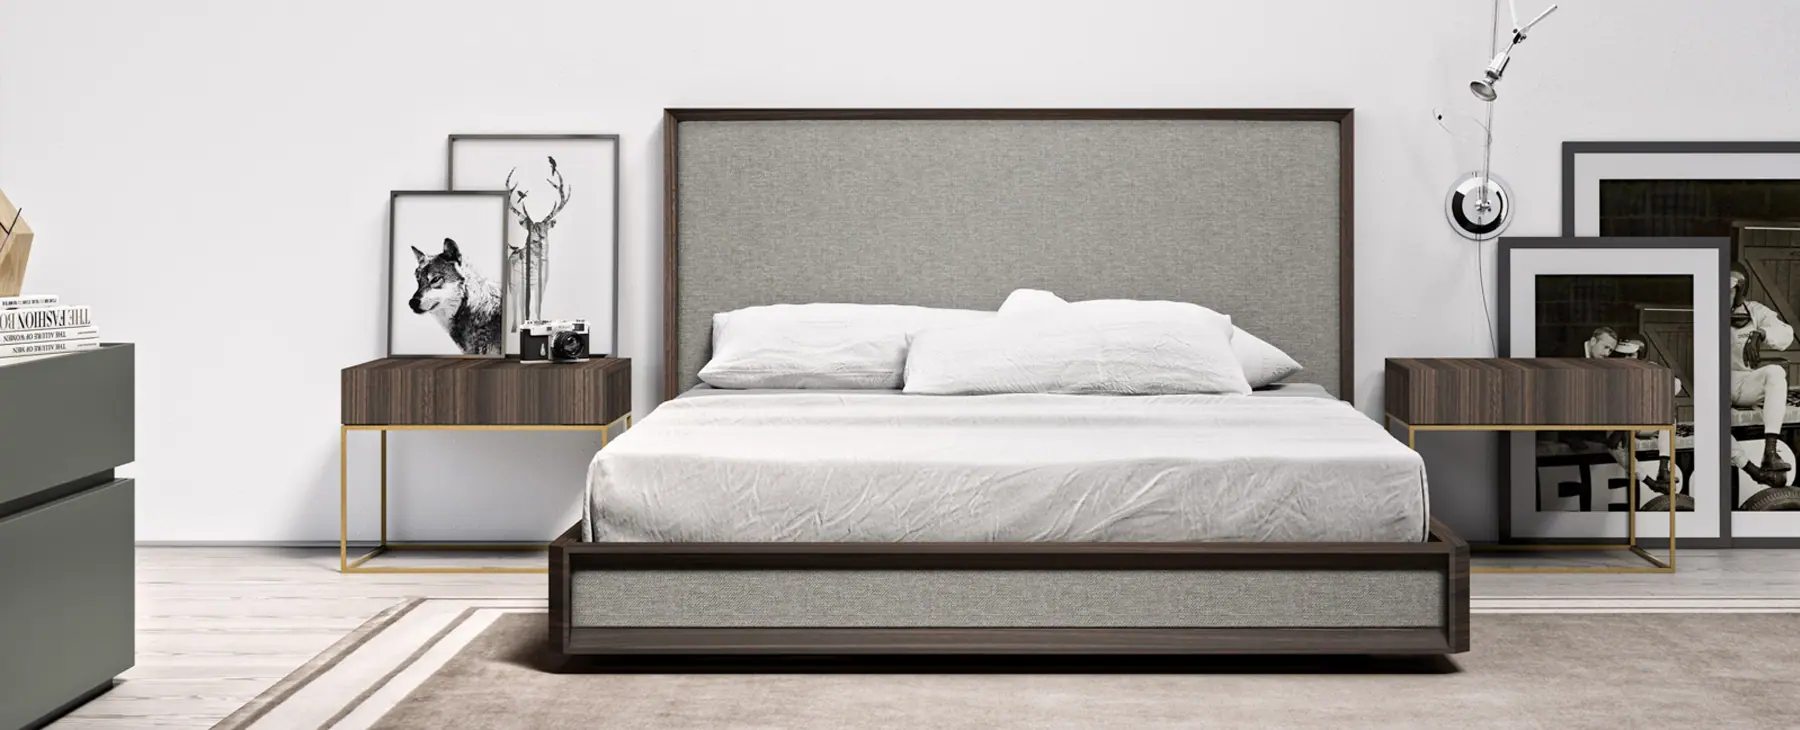 42798-42788-beds-and-headboards